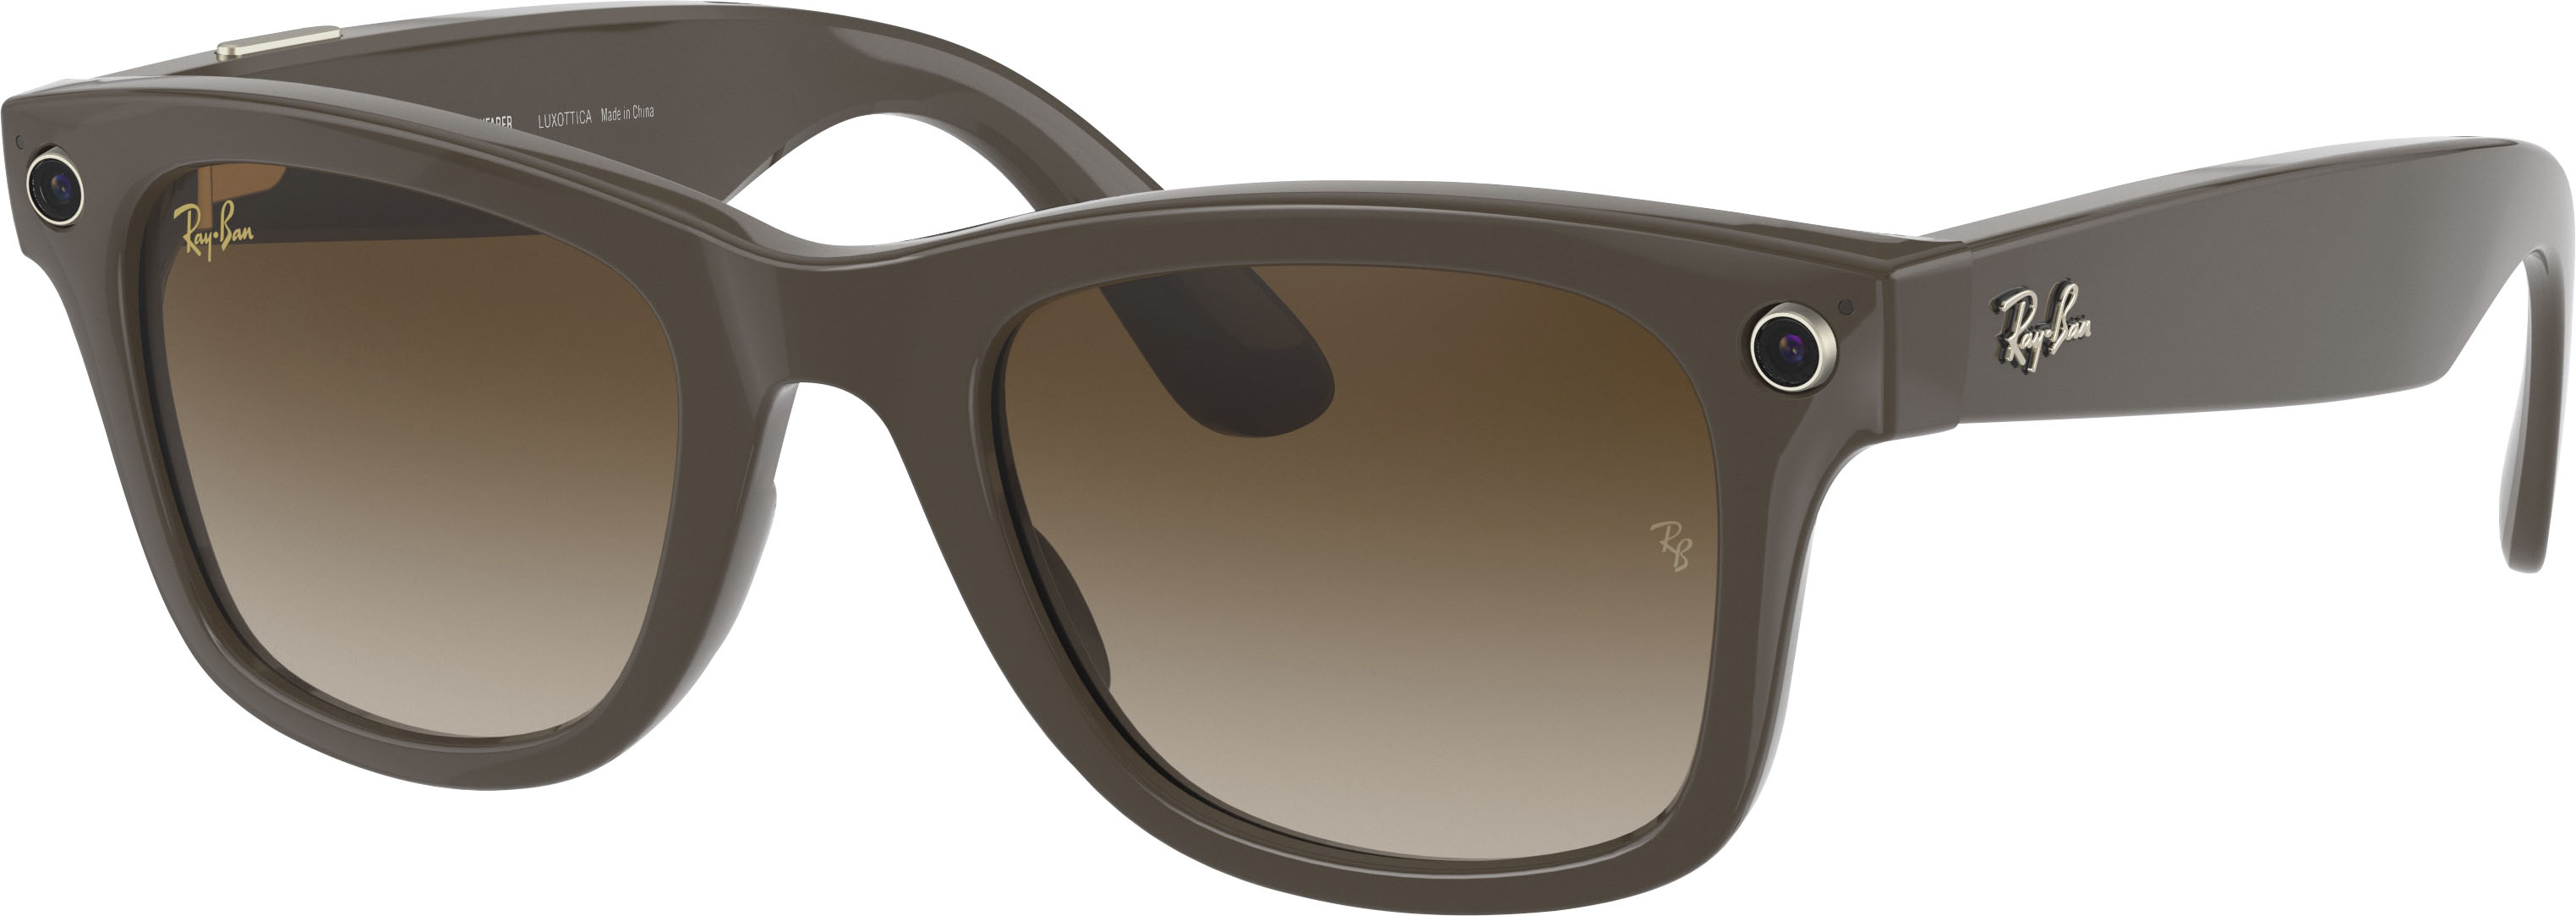 Questions and Answers: Ray-Ban Stories Wayfarer Smart Glasses 50mm ...